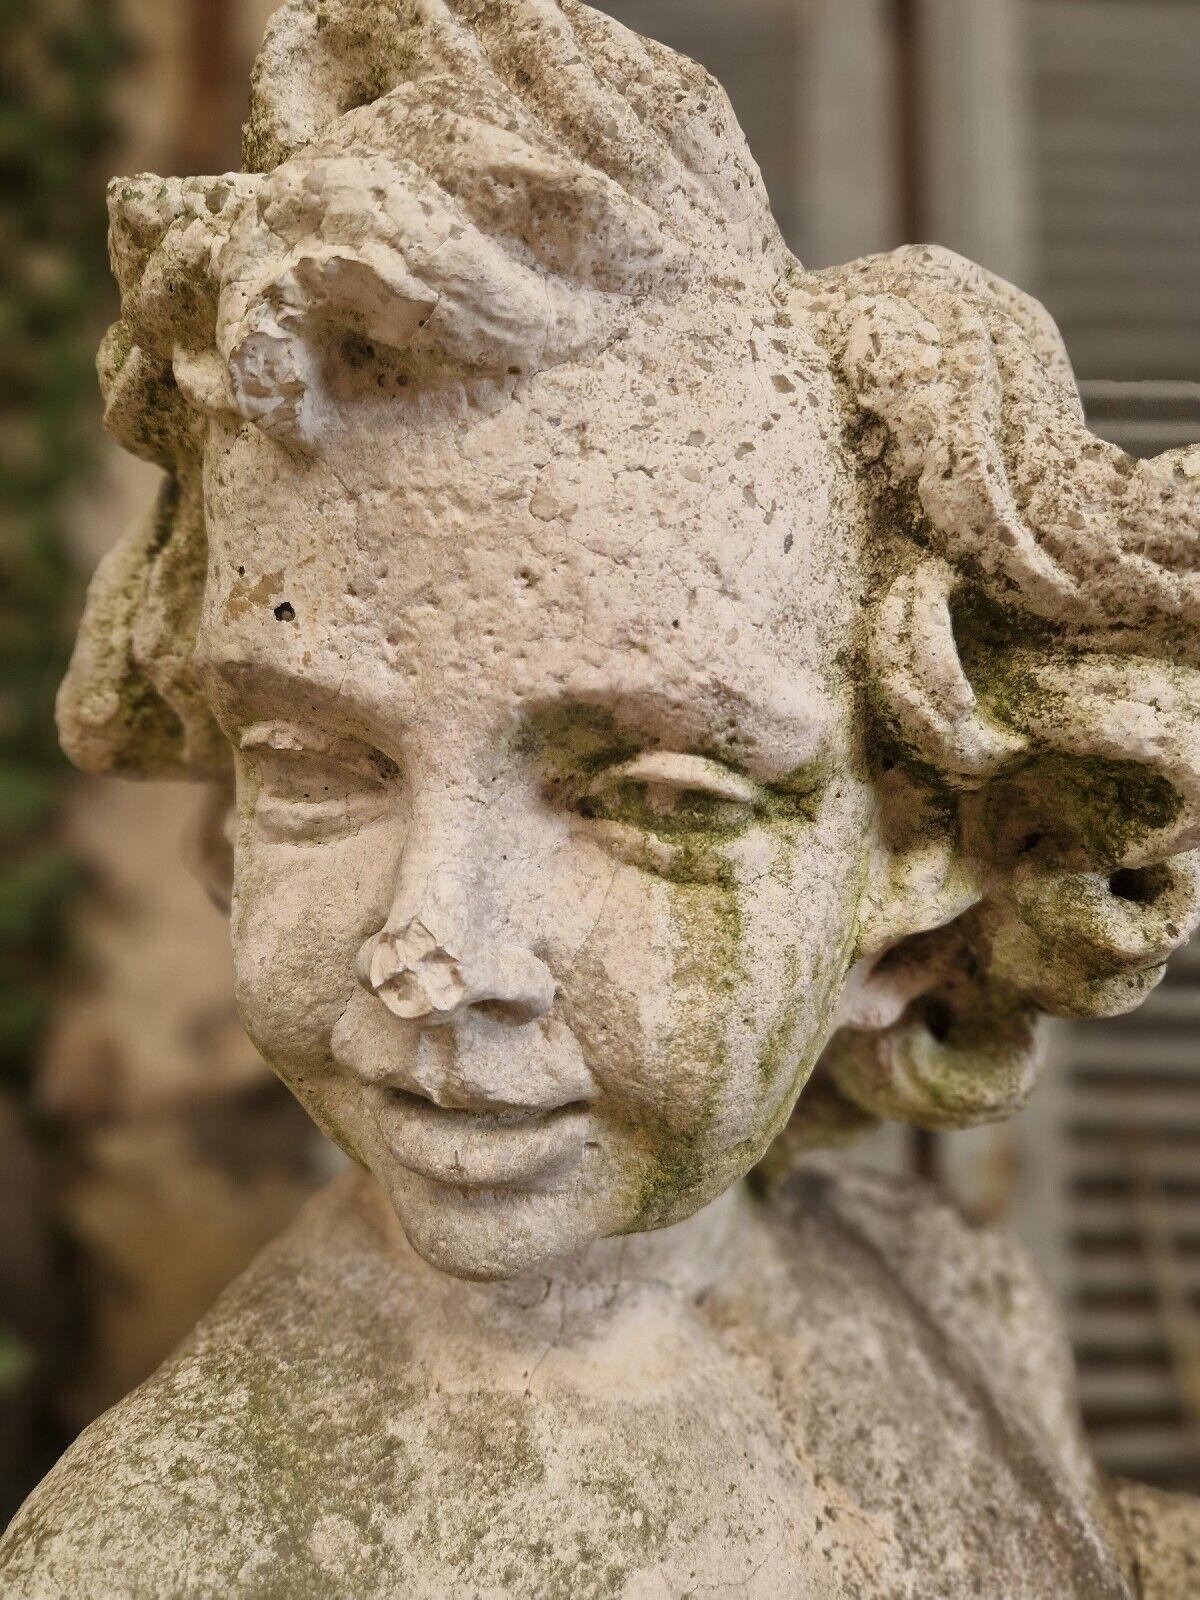 We are delighted to offer for sale this Fabulous Statue - Infant Bacchus Harvester

This fantastic Outdoor or Indoor Statue, is of the young Roman God Bacchus.

The statue is nicely weathered and has signs of age including a little chip on his